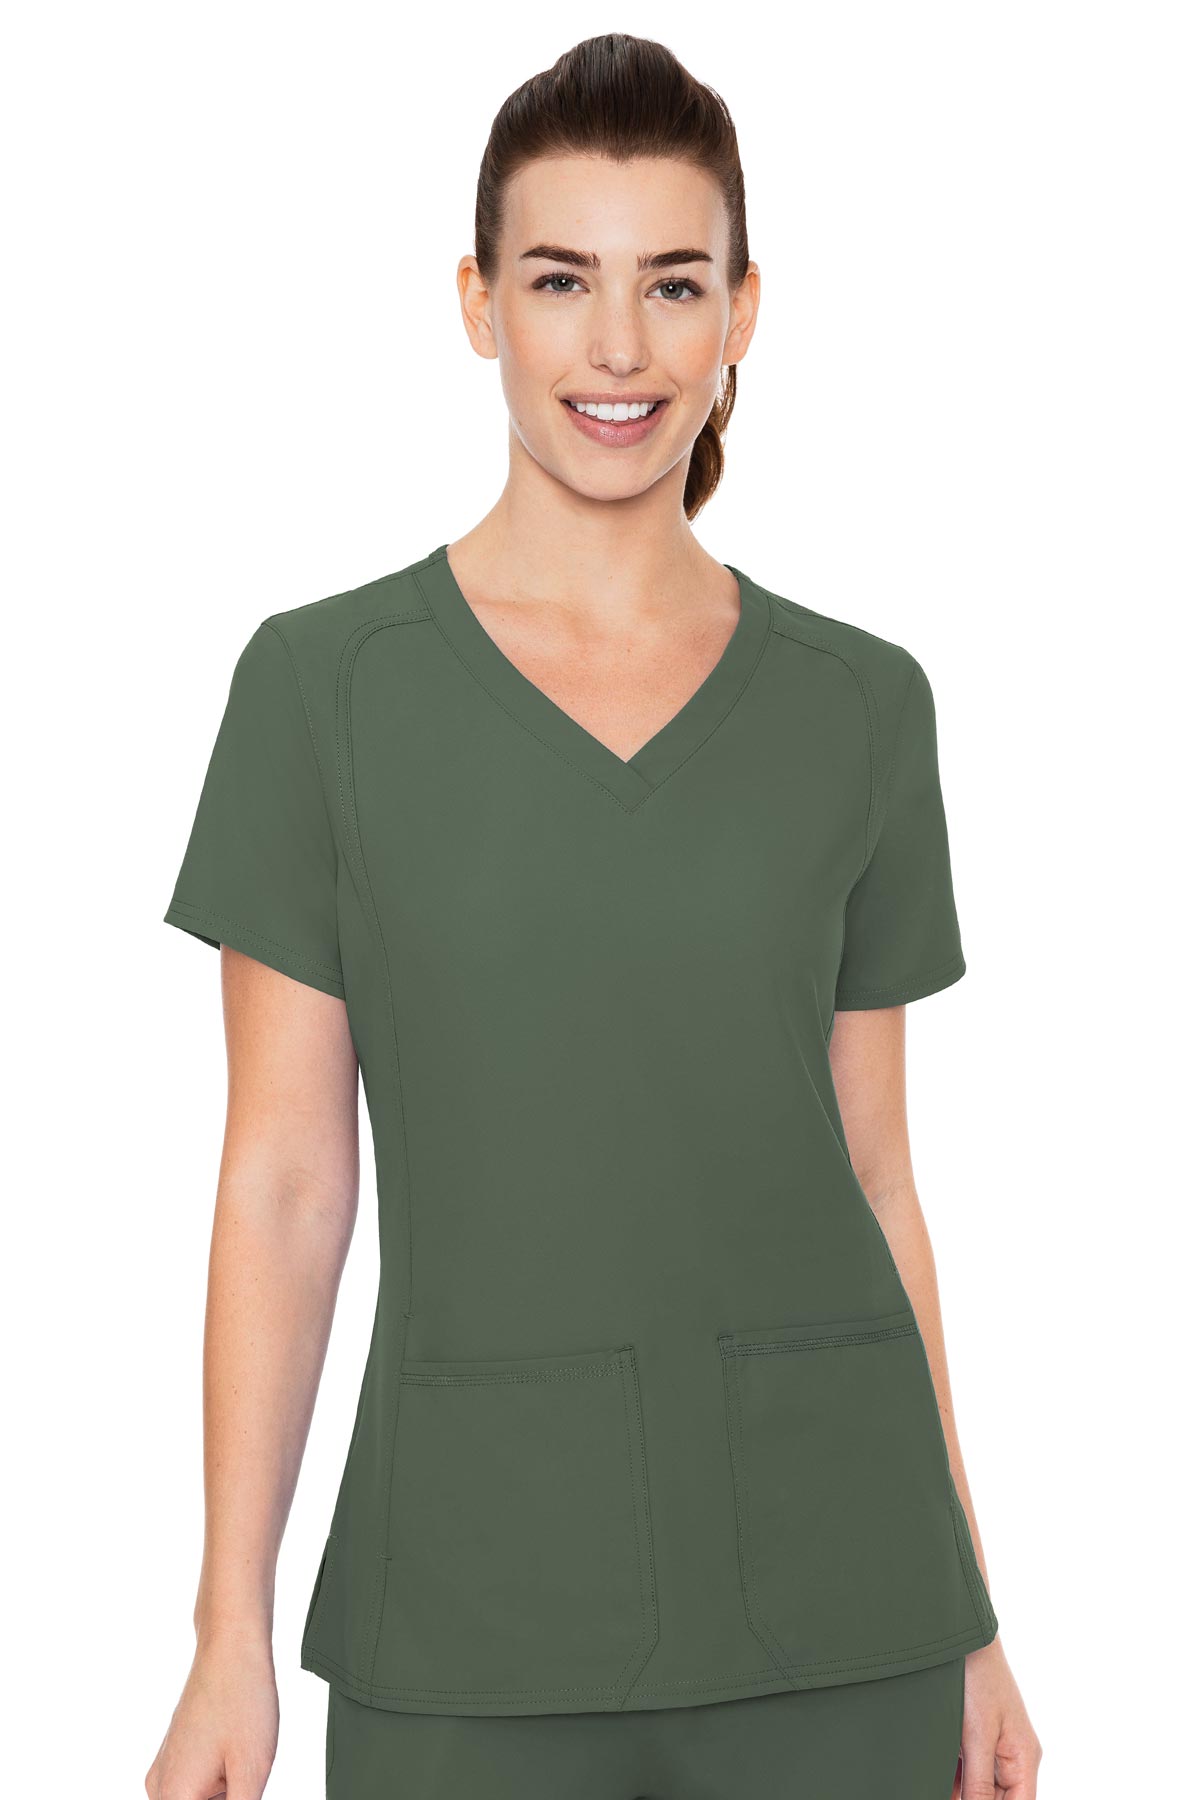 Med Couture Olive TOP